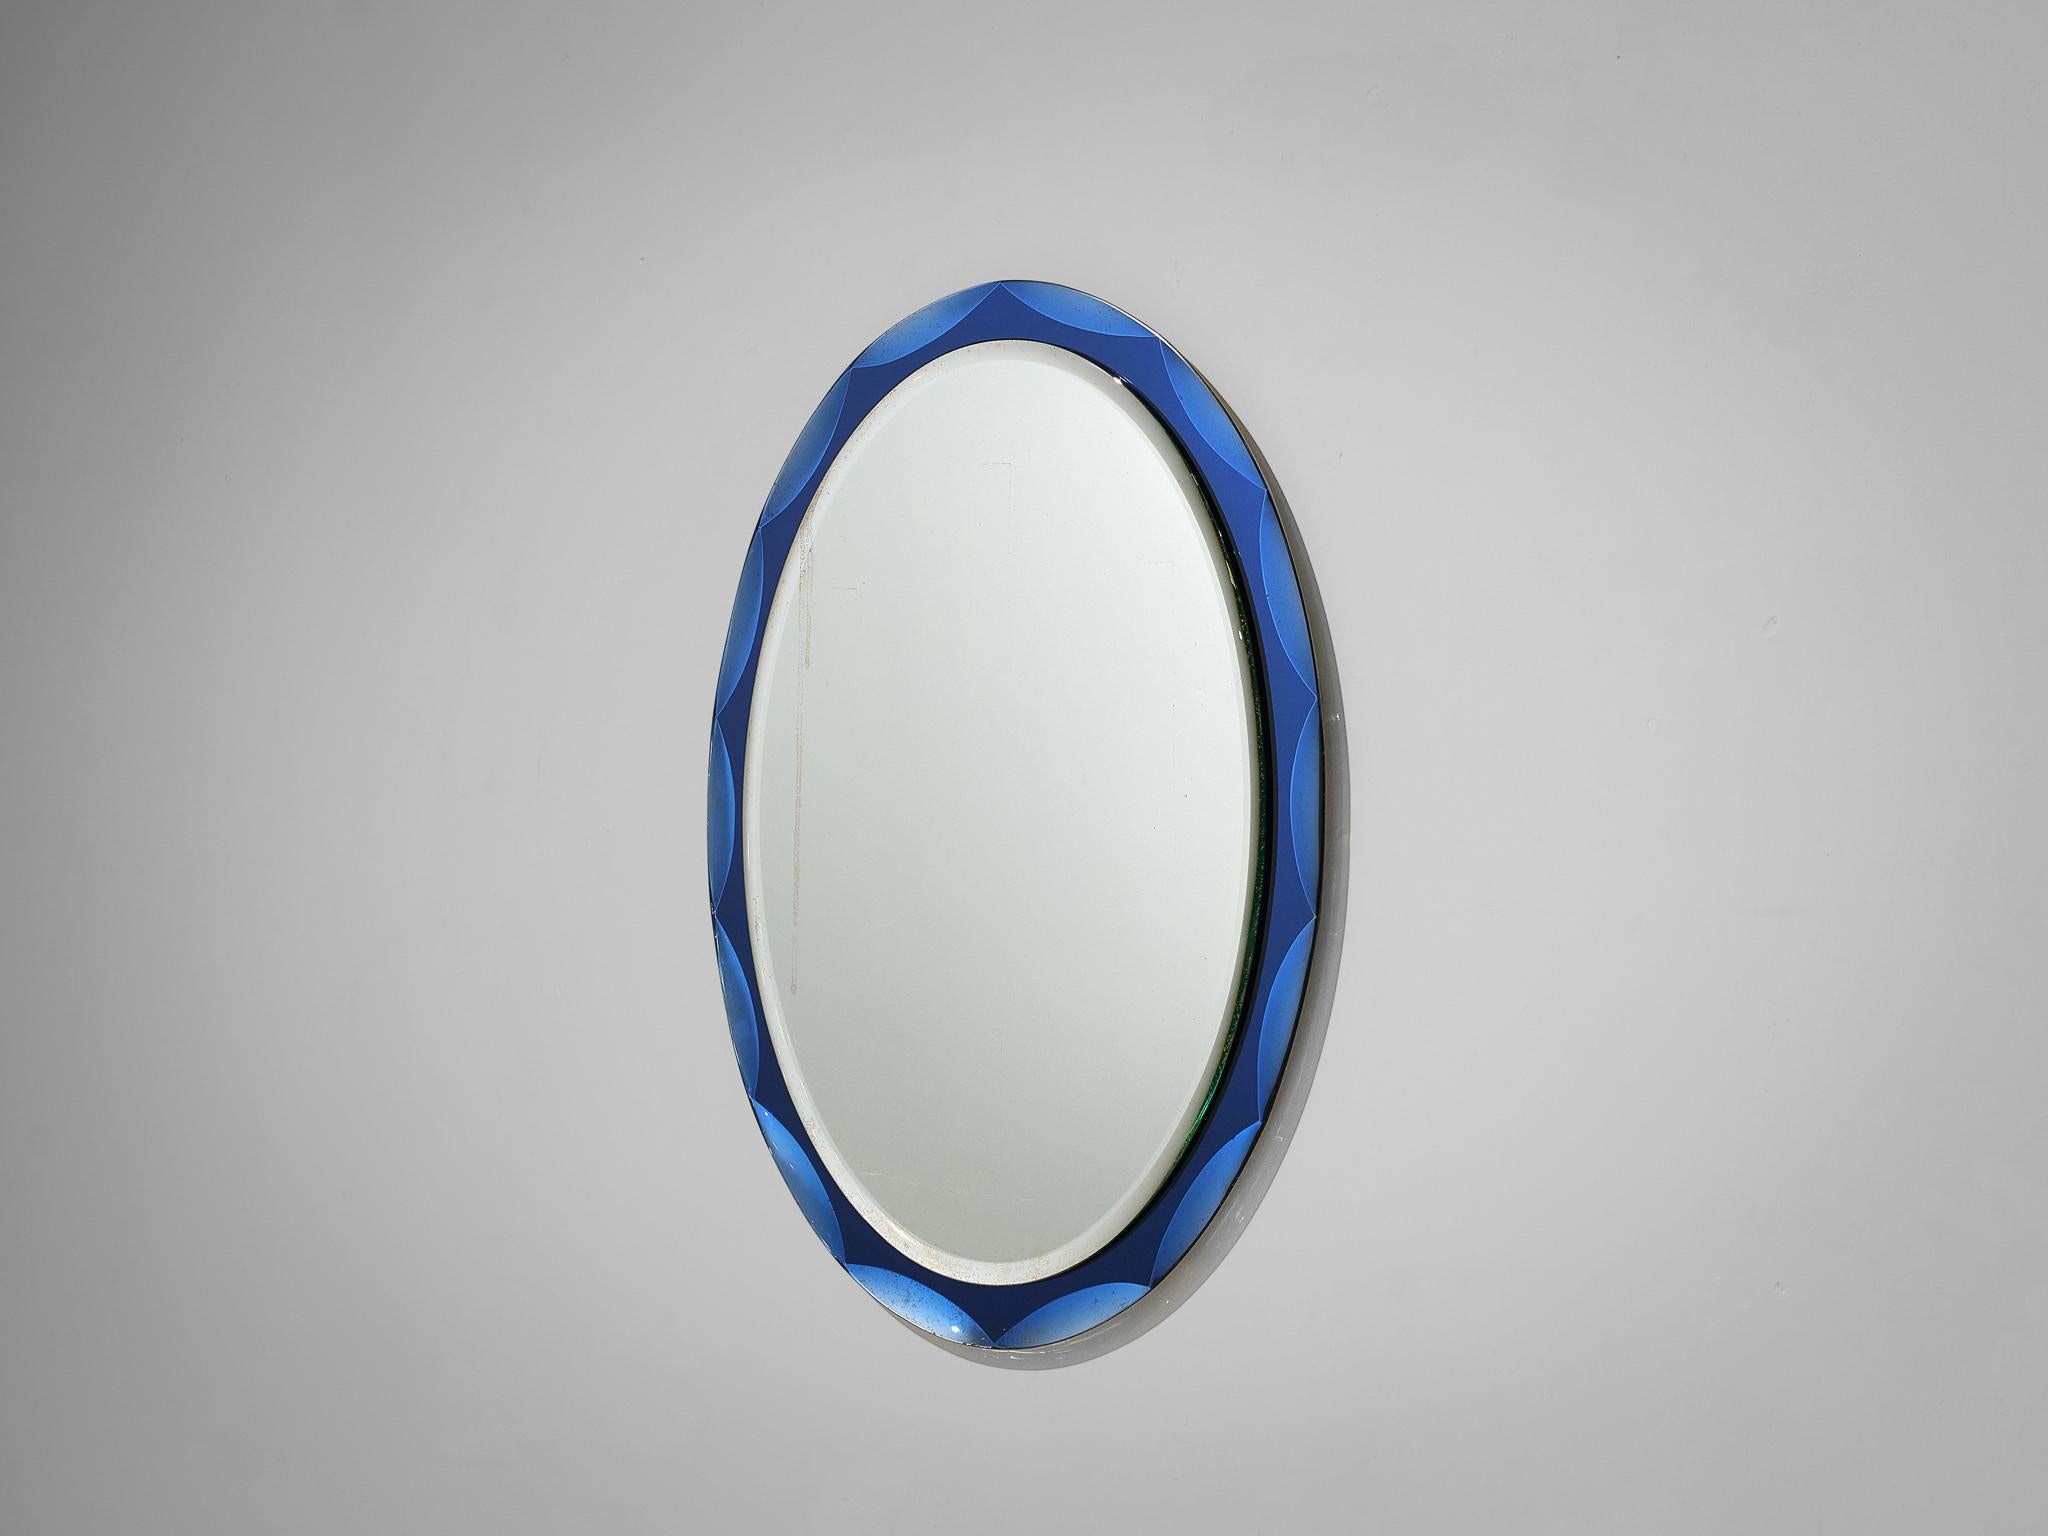 Italian shield mirror with cobalt blue detailed frame, Italy, 1950s

The mirror is surrounded by beveled blue glass frame. The glass scalloped rim has been nicely executed in cobalt blue, inspired by Arte Shield mirrors. A stunning mirror with